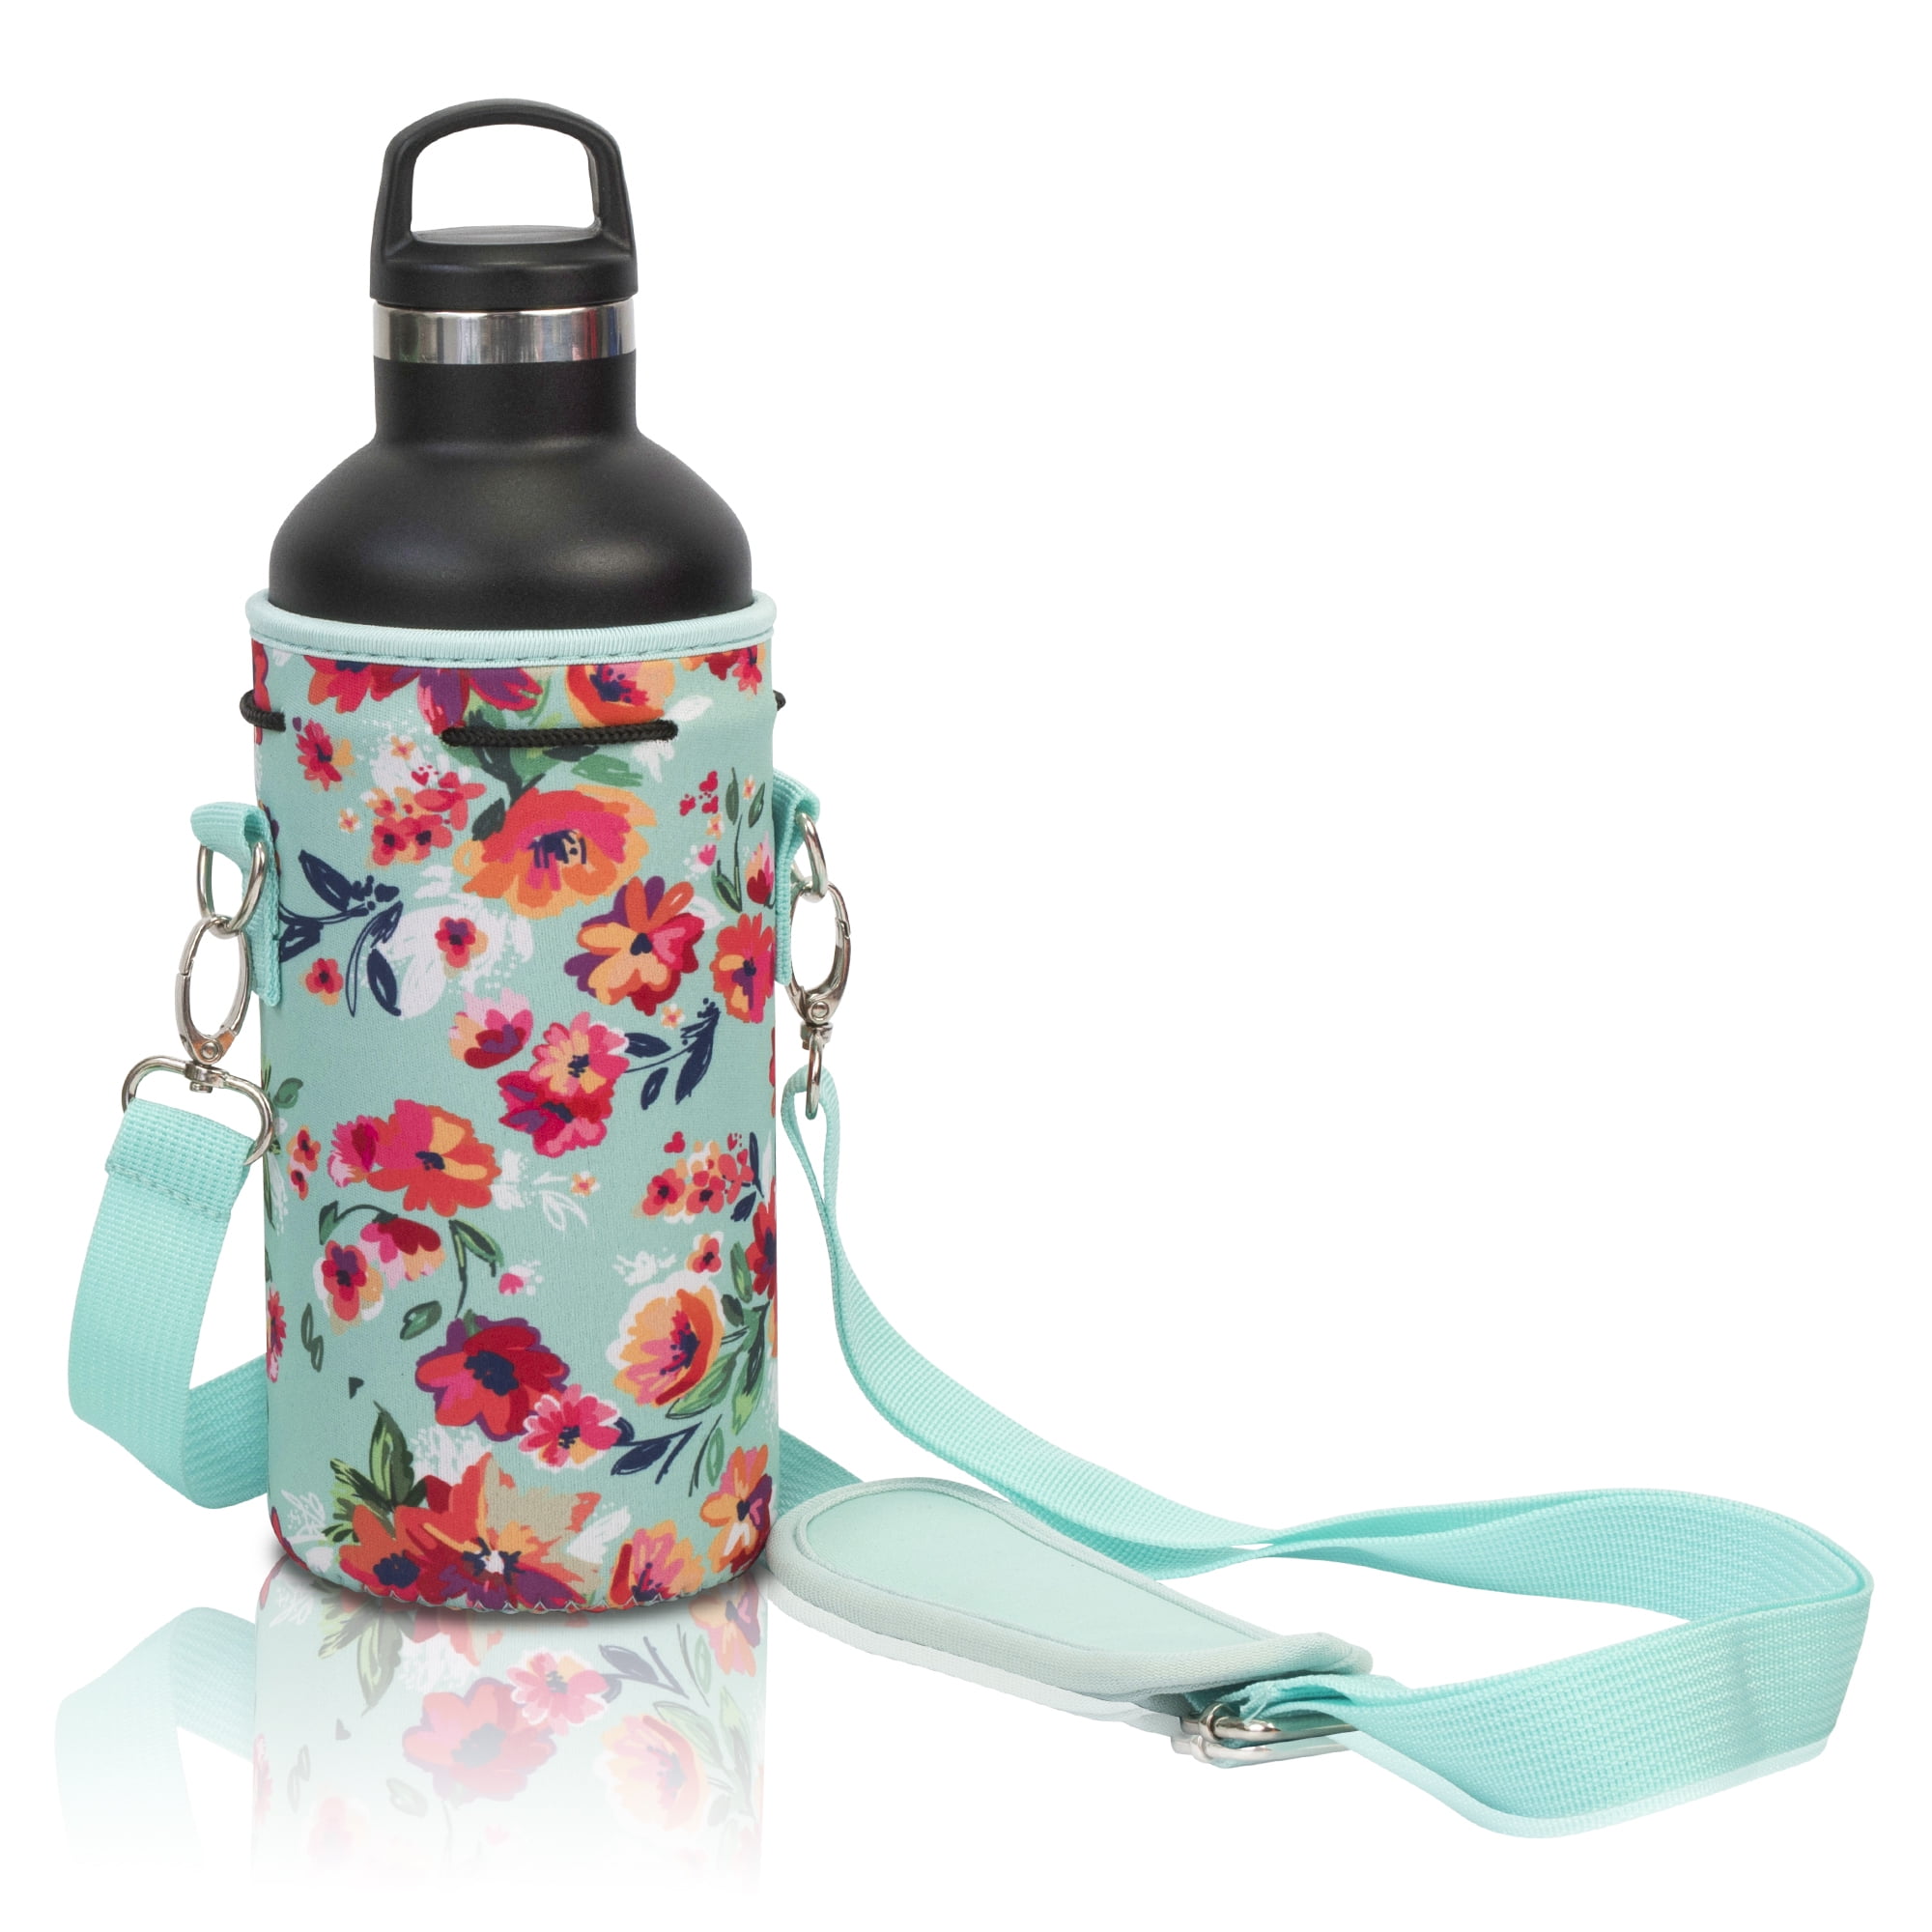 Made Easy Kit Neoprene Water Bottle Carrier Holder with Adjustable Shoulder Strap for Insulating and Carrying Water Container Cantene Flask Available in 5 Sizes 